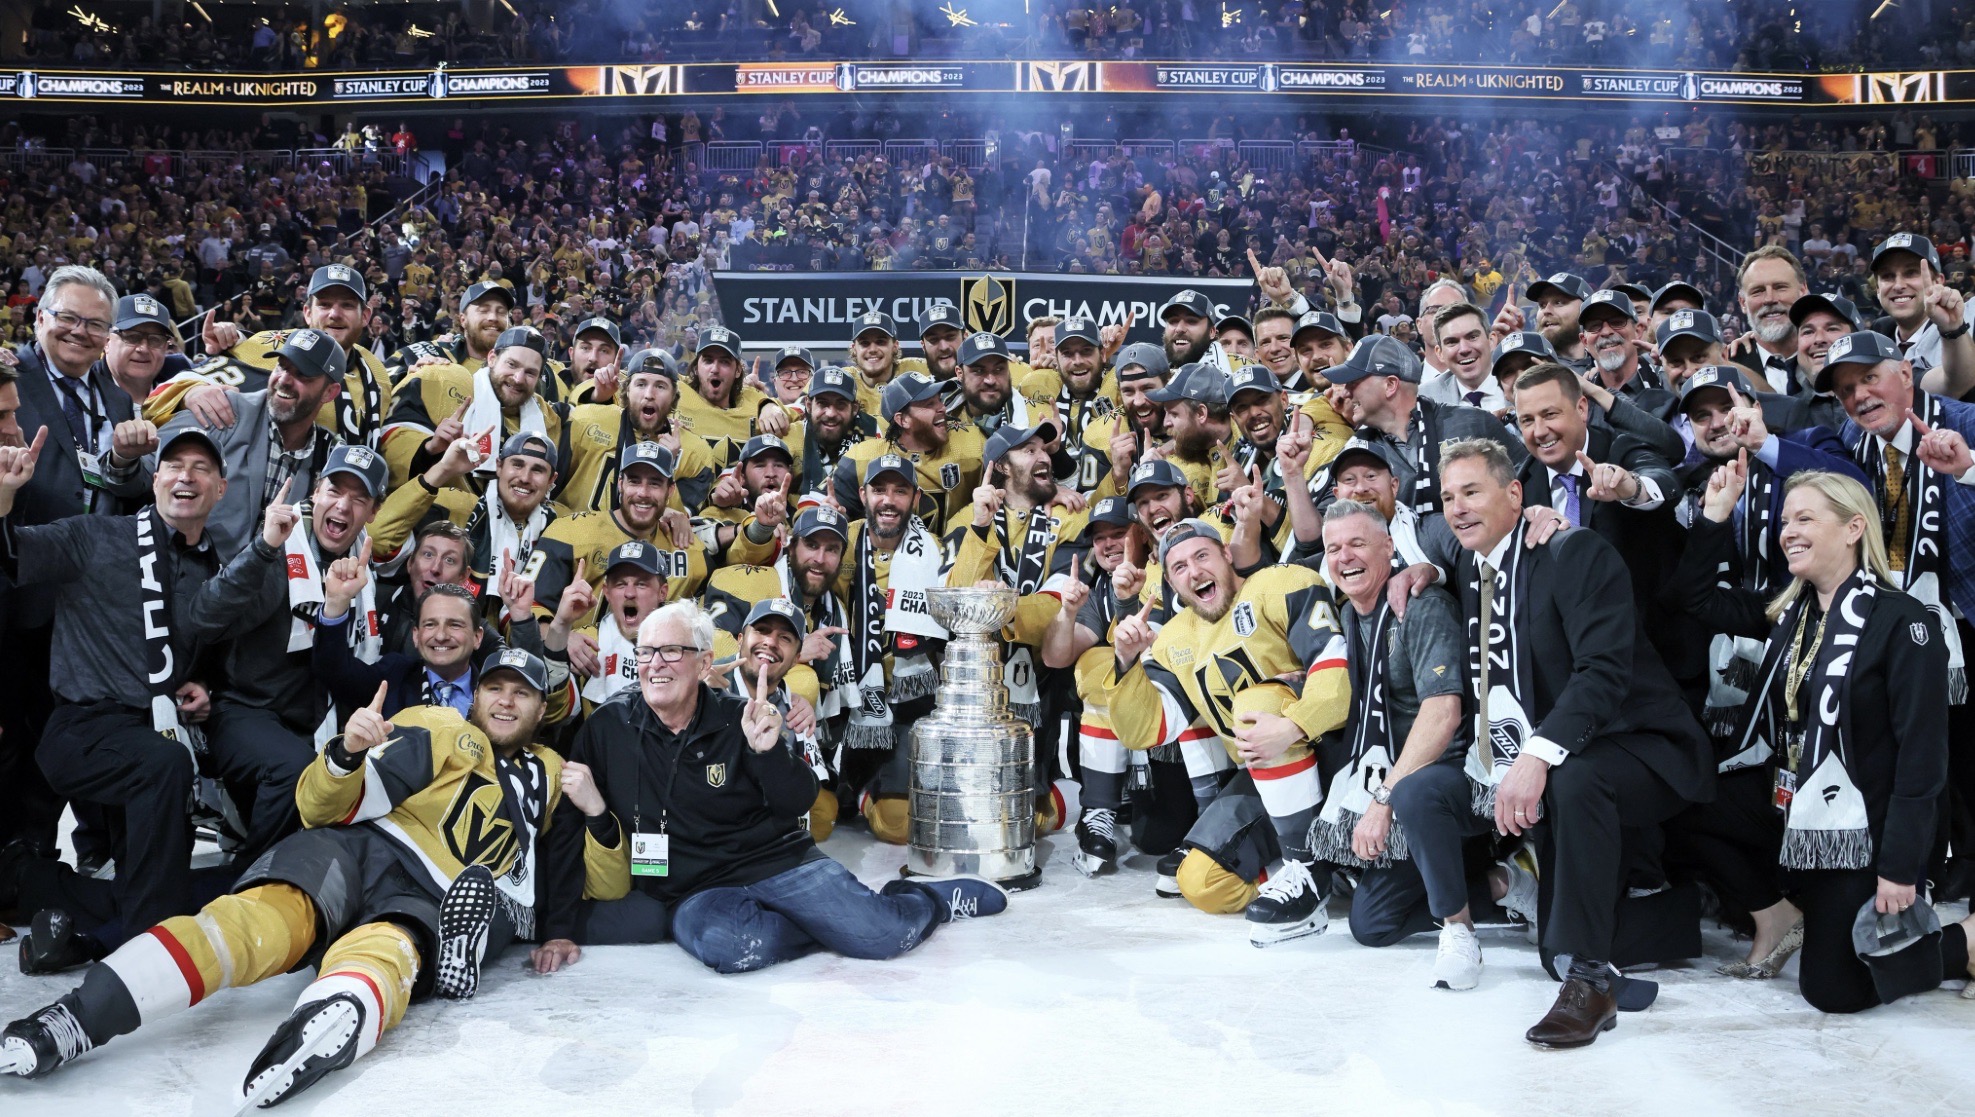 https://game-on-hockey.s3.us-east-2.amazonaws.com/5.-zach-whitecloud-and-the-stanley-cup-champion-vegas-golden-knights-gol-(1).jpeg